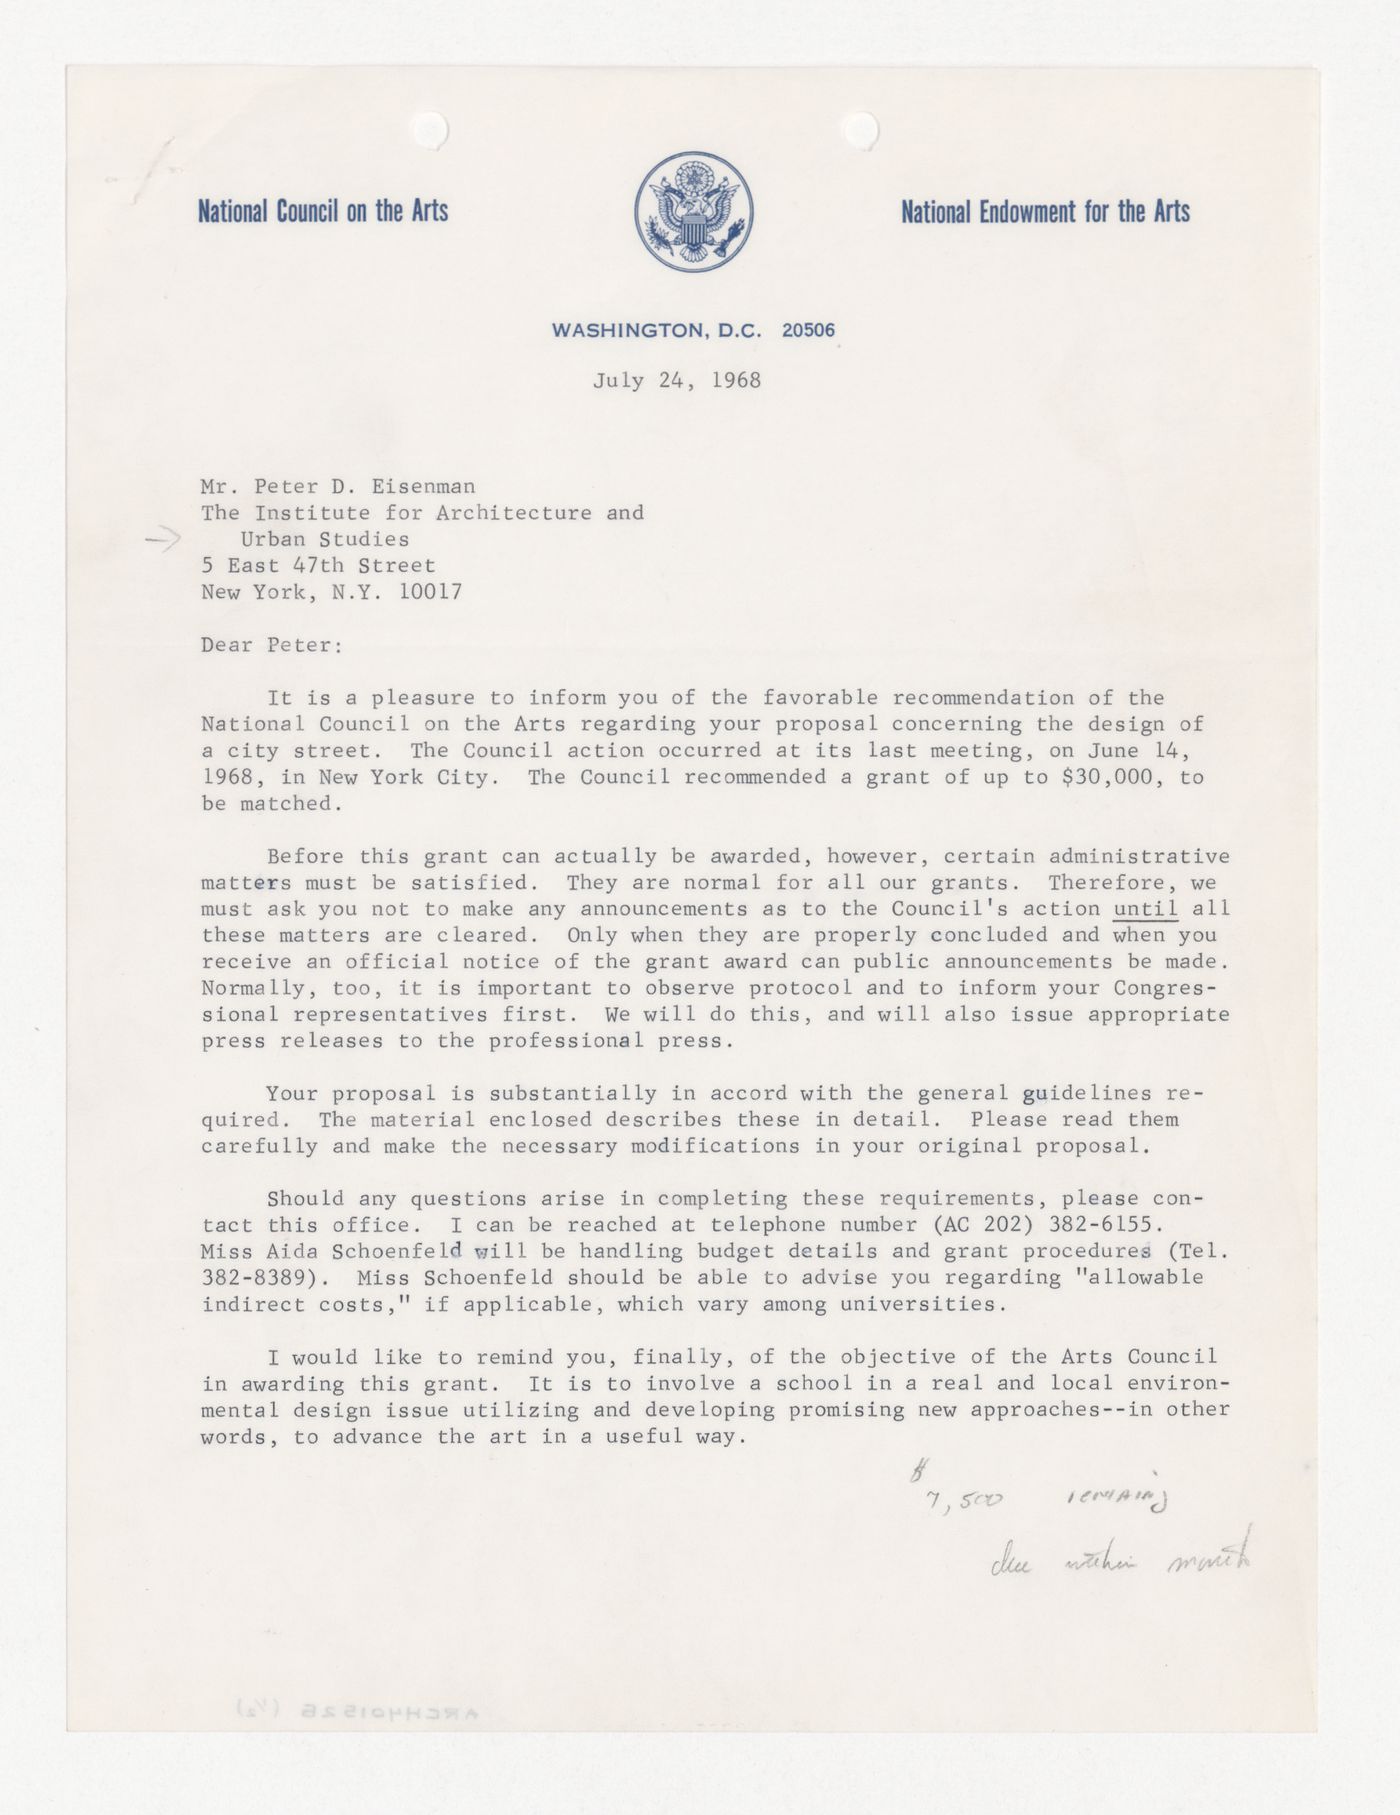 Letter from Paul D. Spreiregen to Peter D. Eisenman about funding from the National Endowment for the Arts (NEA)